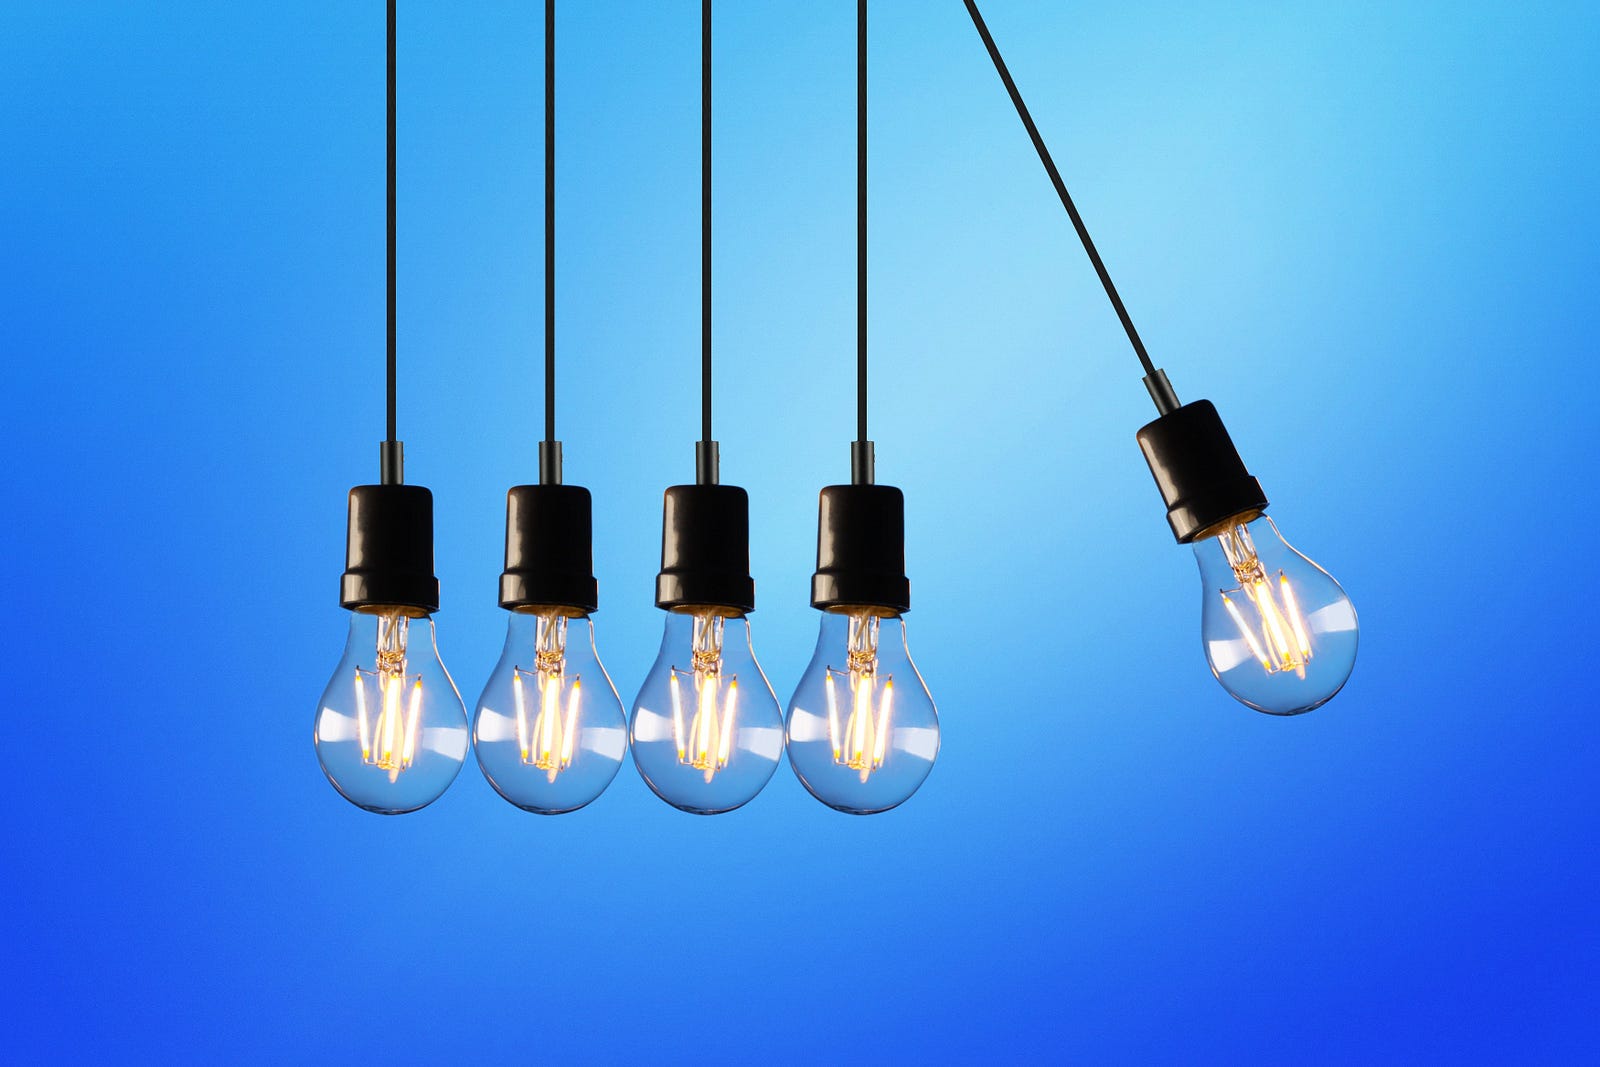 four light bulbs hanging in a row from cords, a fifth light bulb swings off at an angle